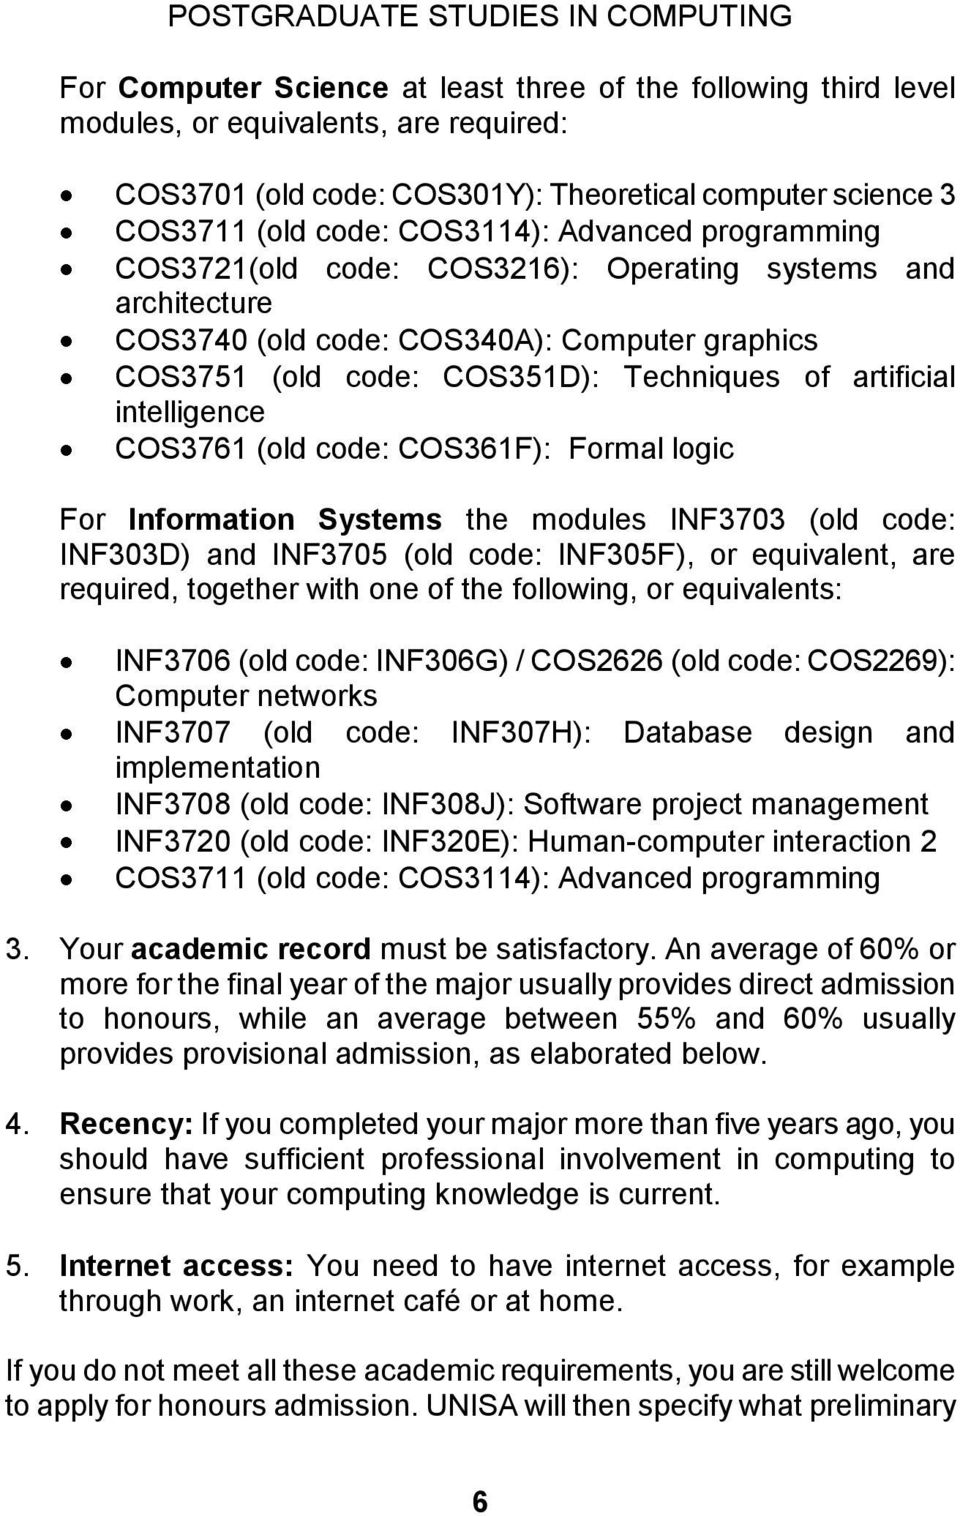 COS3761 (old code: COS361F): Formal logic For Information Systems the modules INF3703 (old code: INF303D) and INF3705 (old code: INF305F), or equivalent, are required, together with one of the